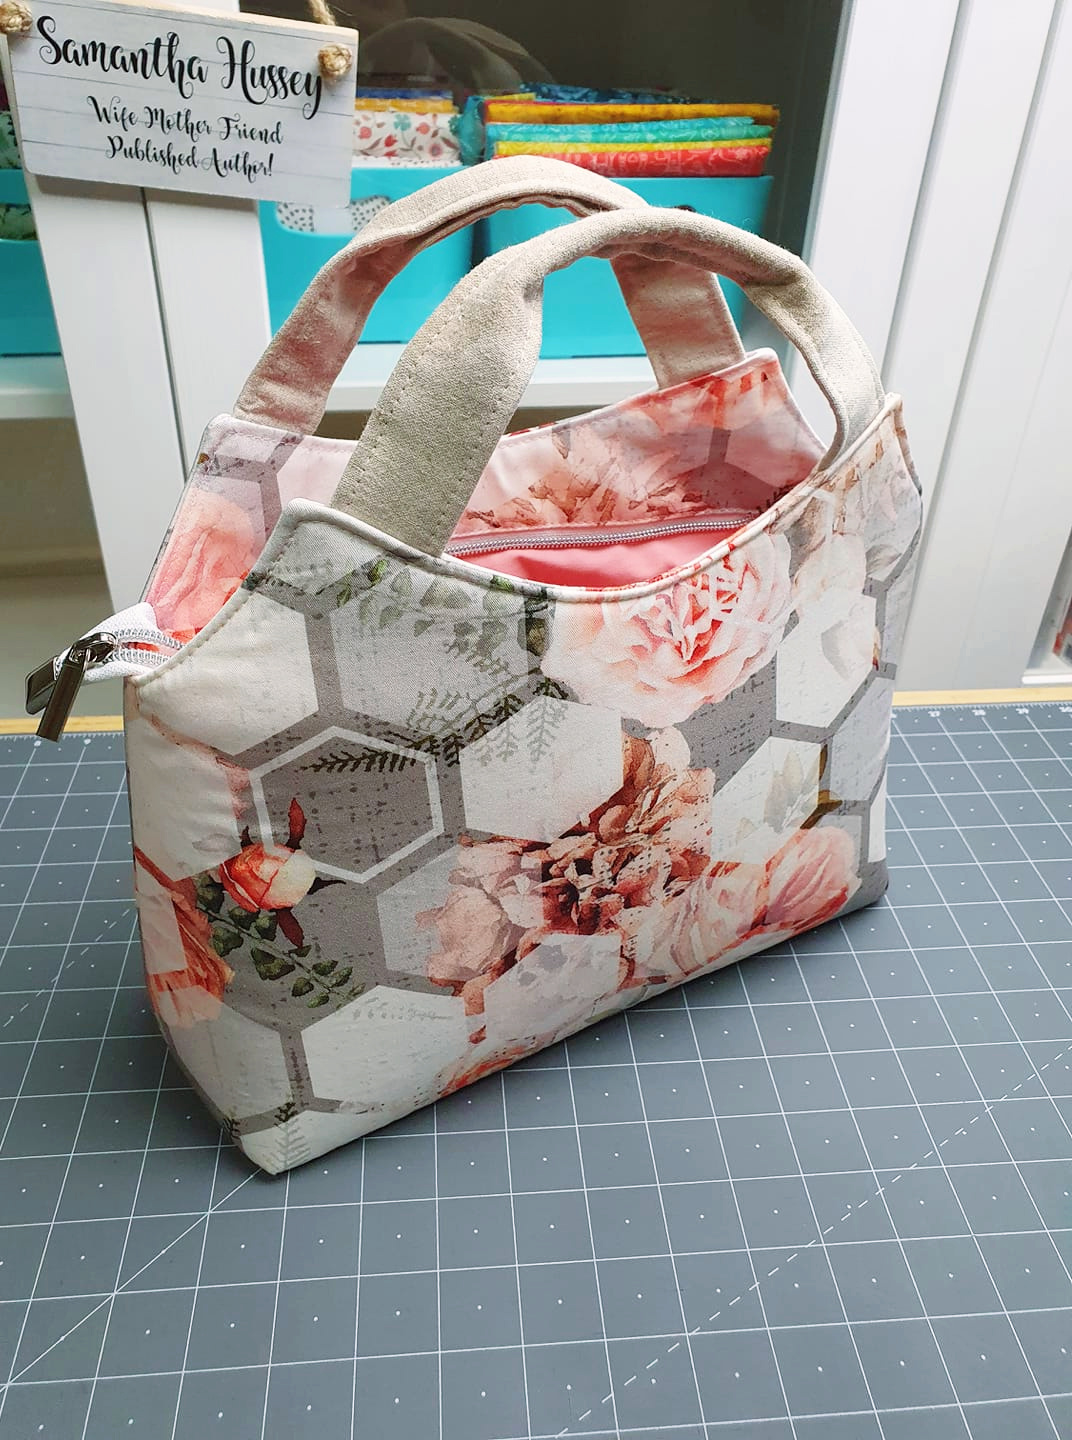 The Hope Handbag designed by Sewing Patterns by Mrs H for The Bag of the Month Club